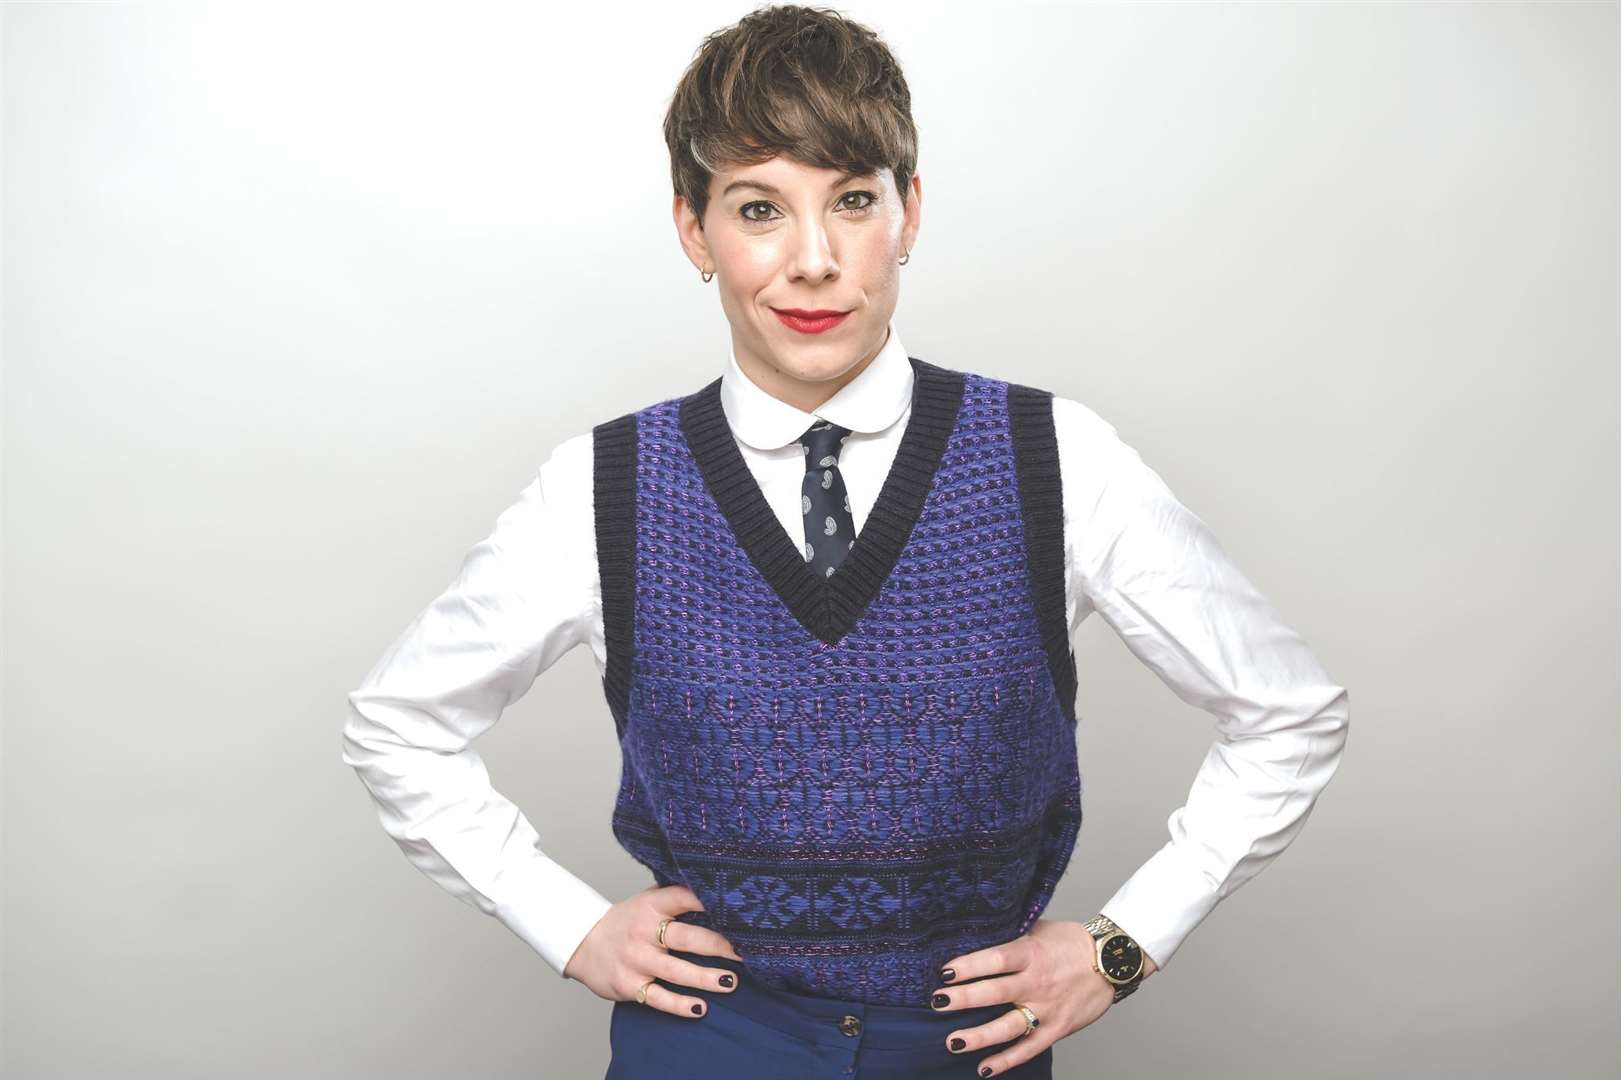 Comedian Suzi Ruffell will visit Aberdeen with her brand new tour, Snappy.